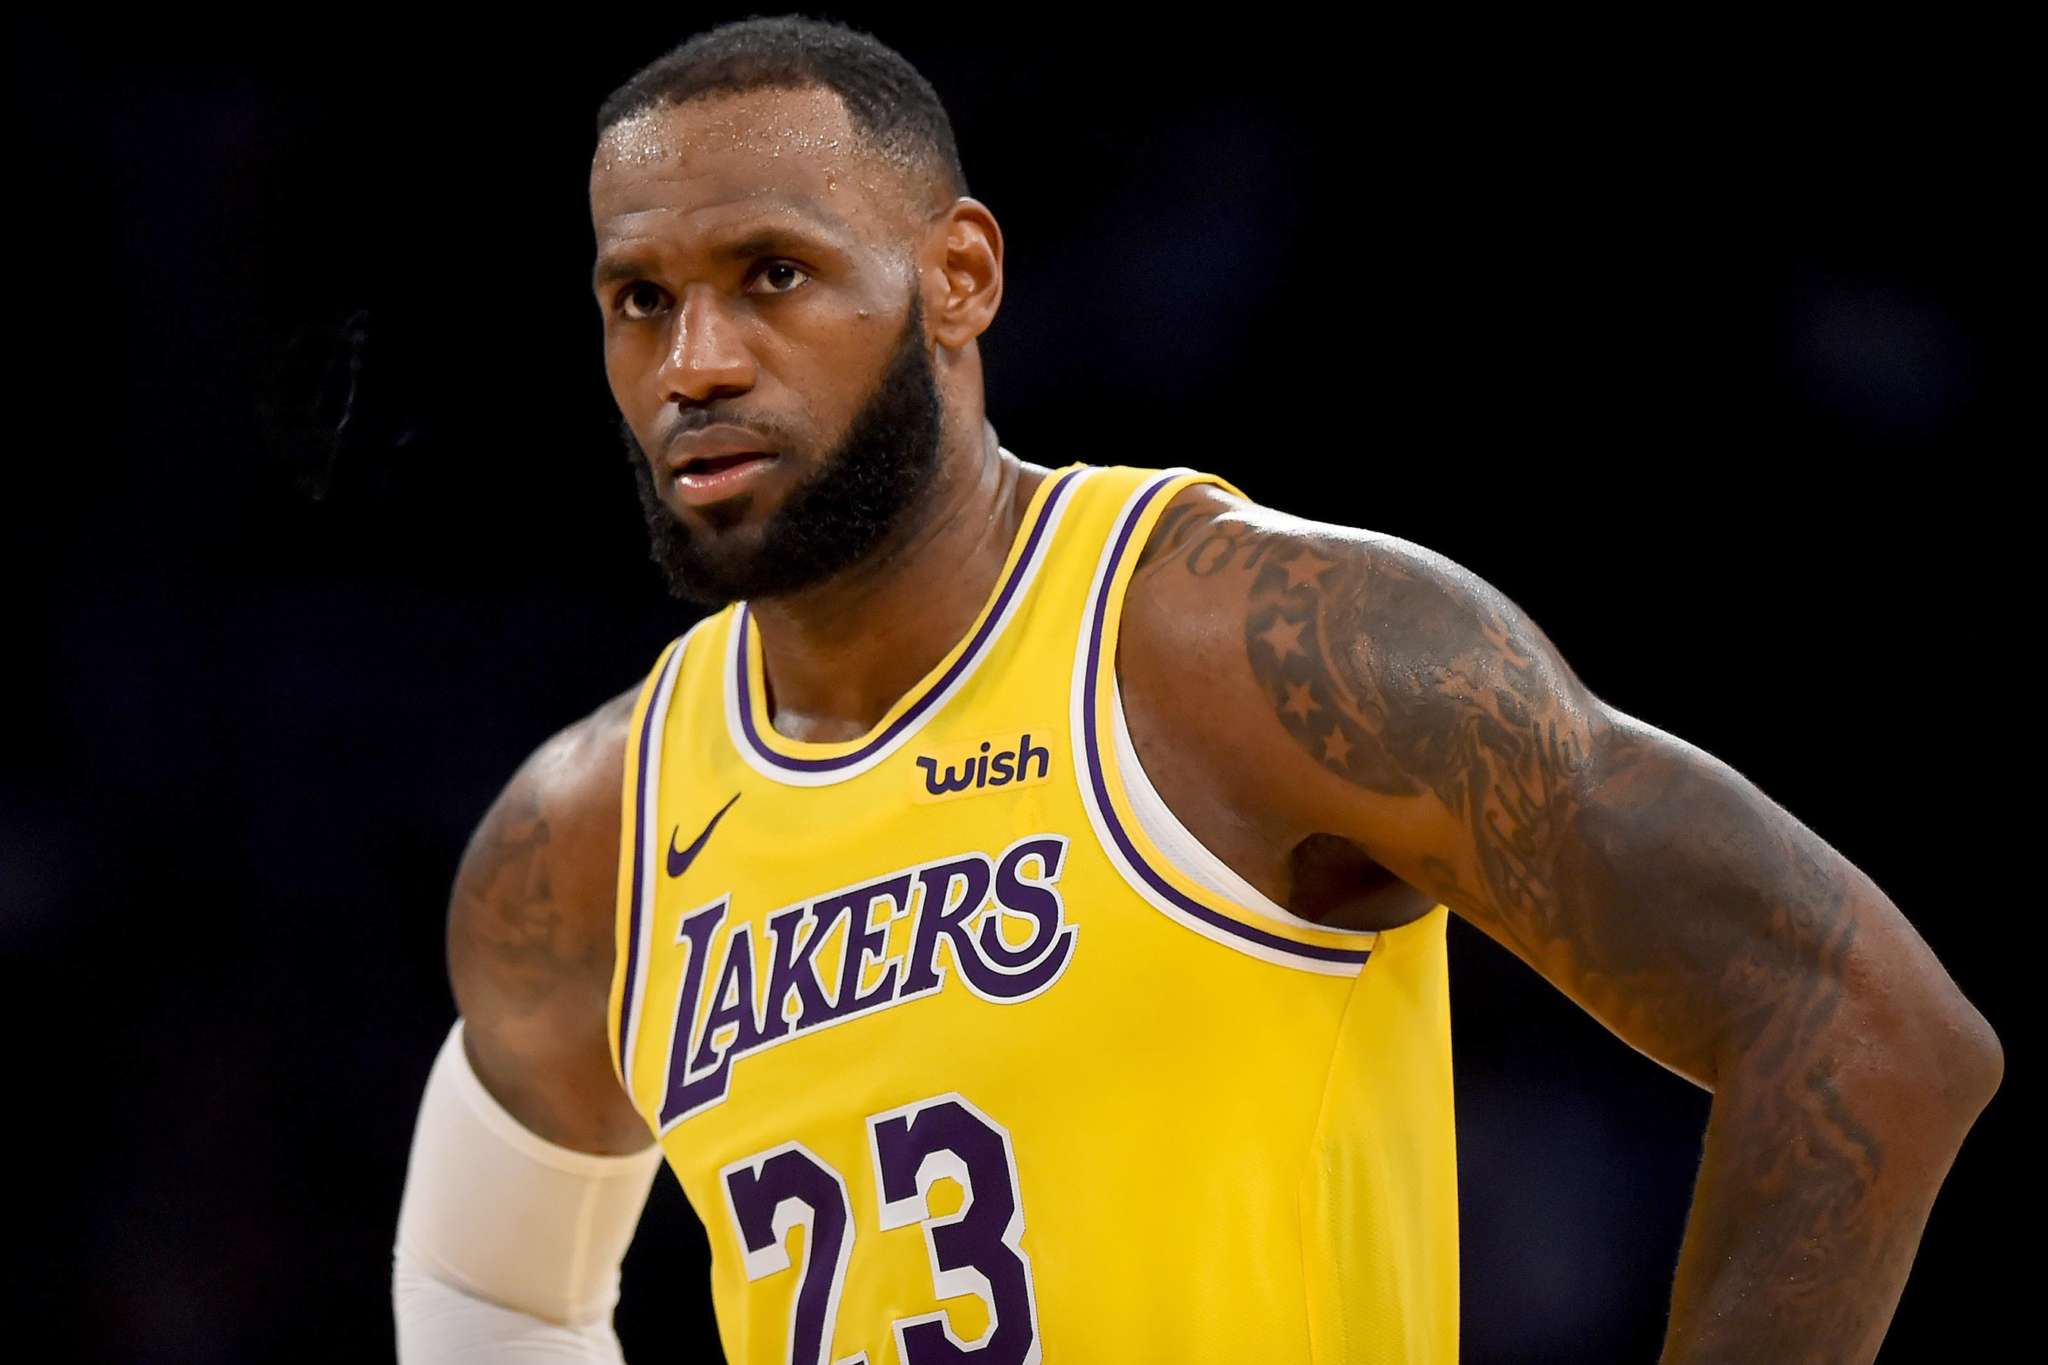 LeBron James Had Enough Of This 2020: 'What We Really Need To Cancel Is 2020'